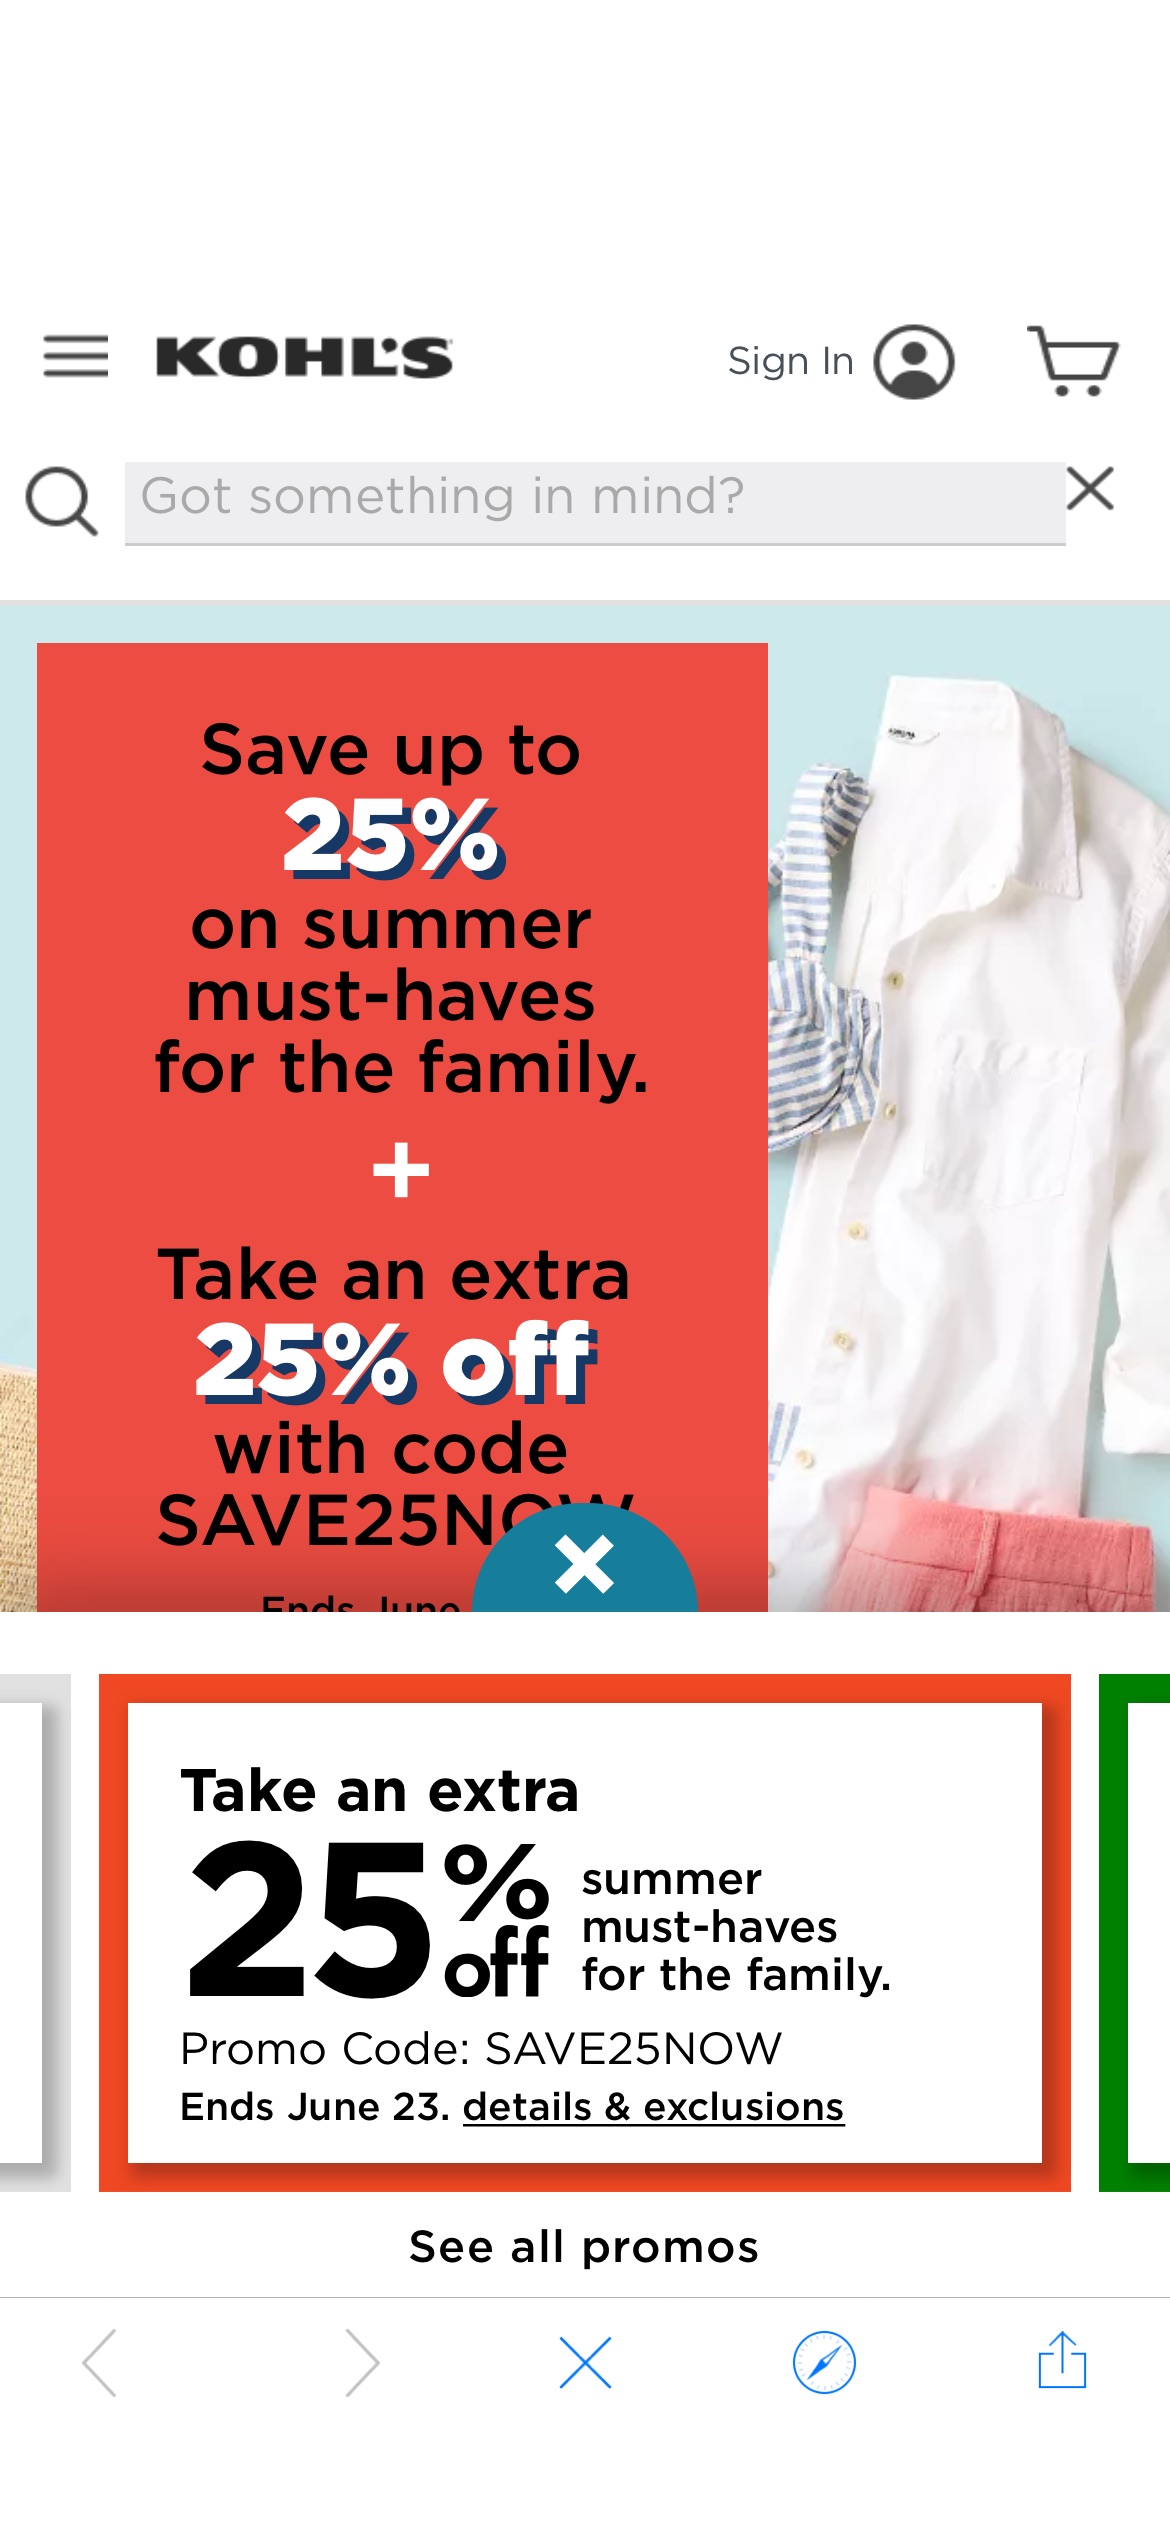 Kohl's | Shop Clothing, Shoes, Home, Kitchen, Bedding, Toys & More 折扣价